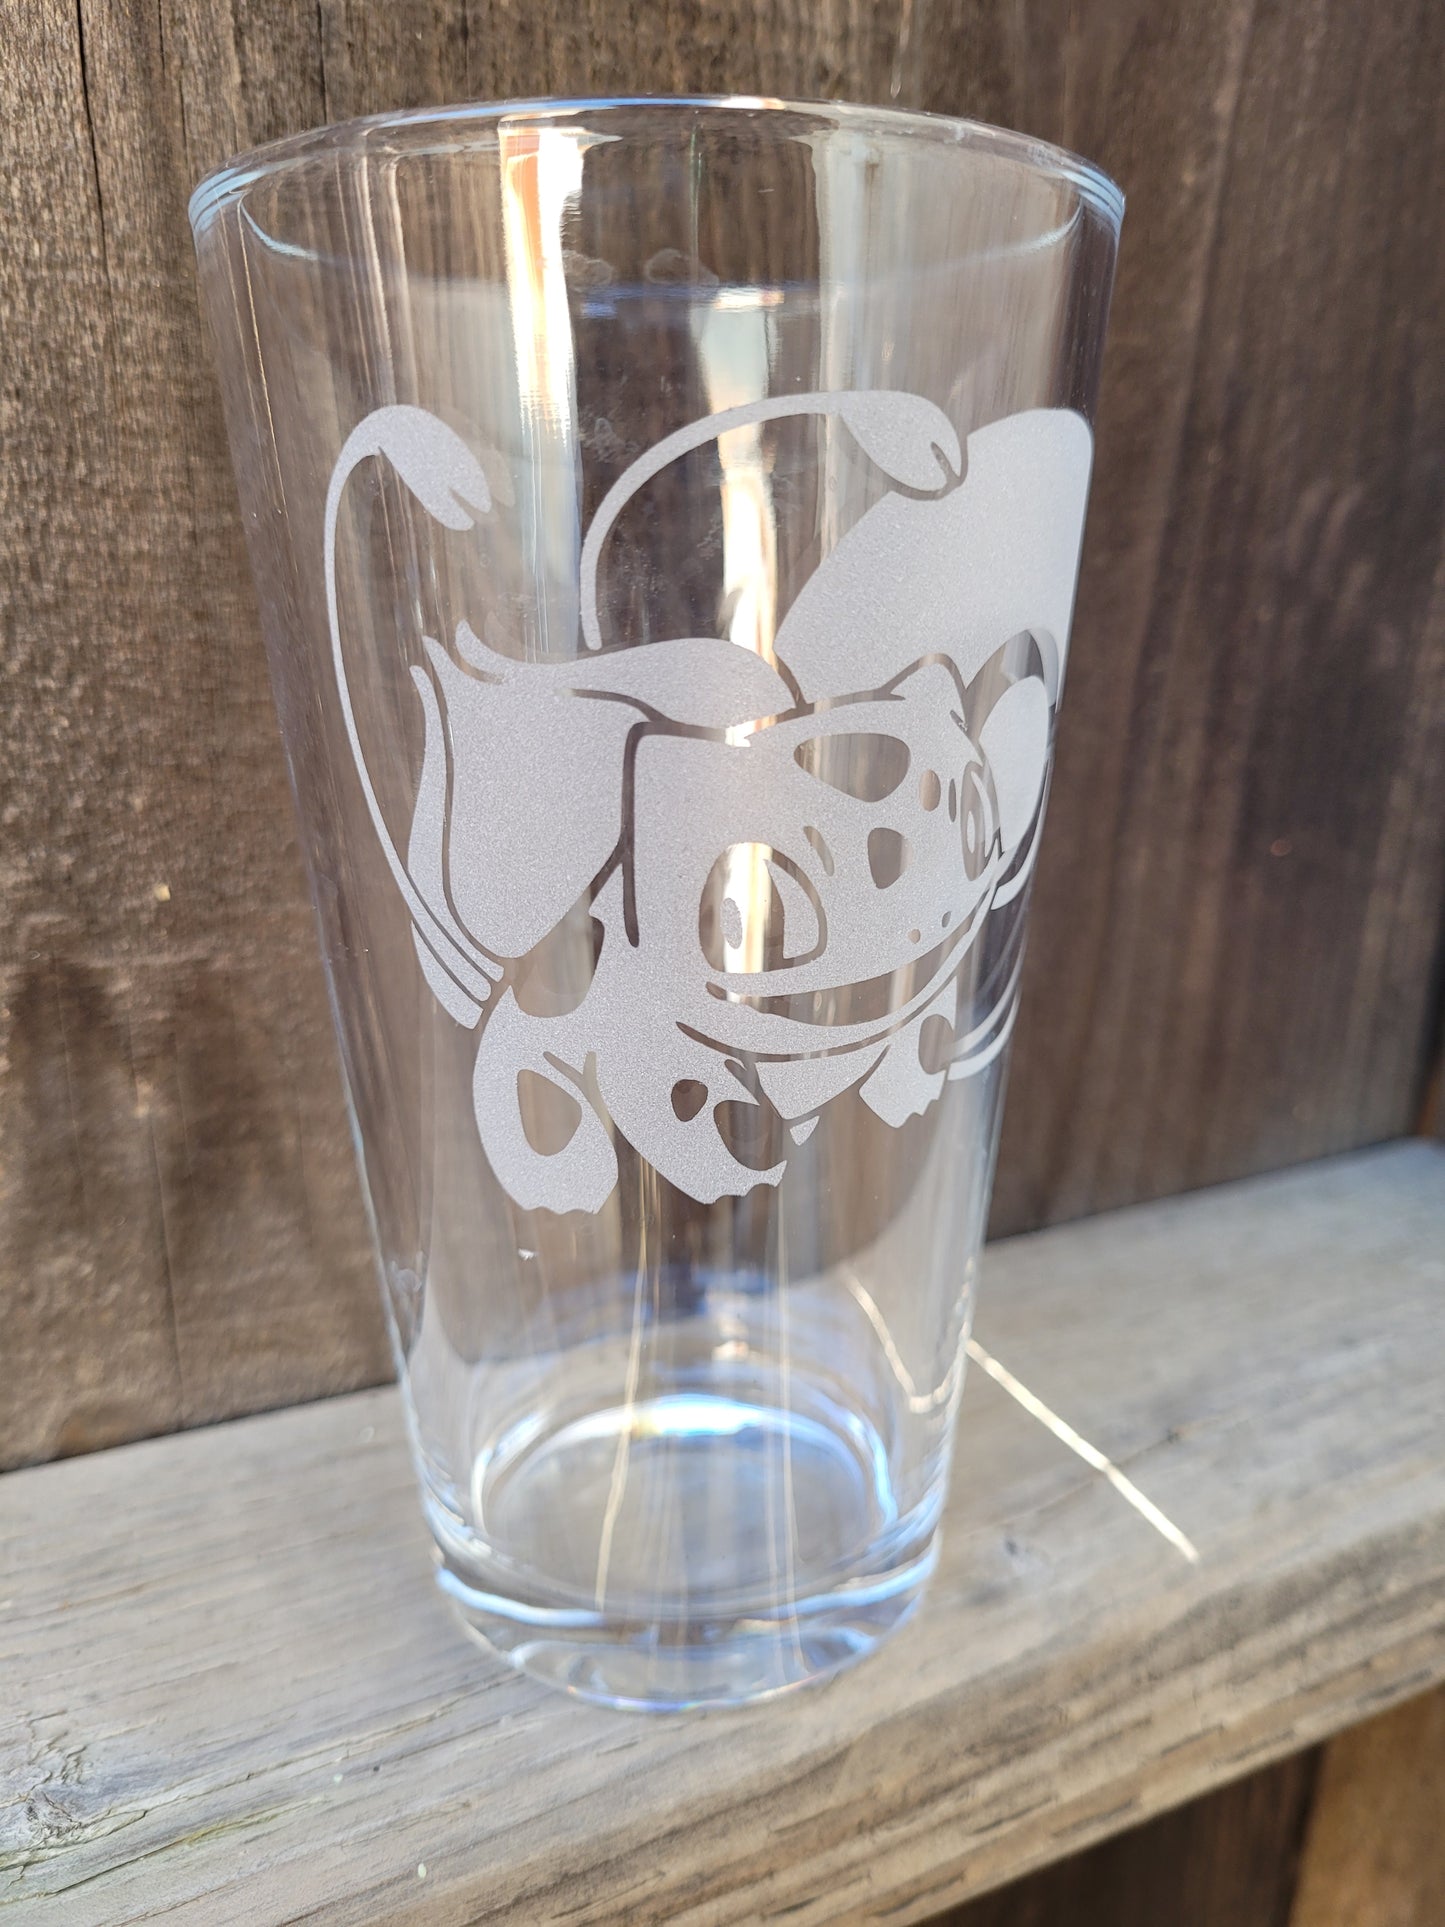 Bulbasaur with Pokeball Pint Glass - Made to Order